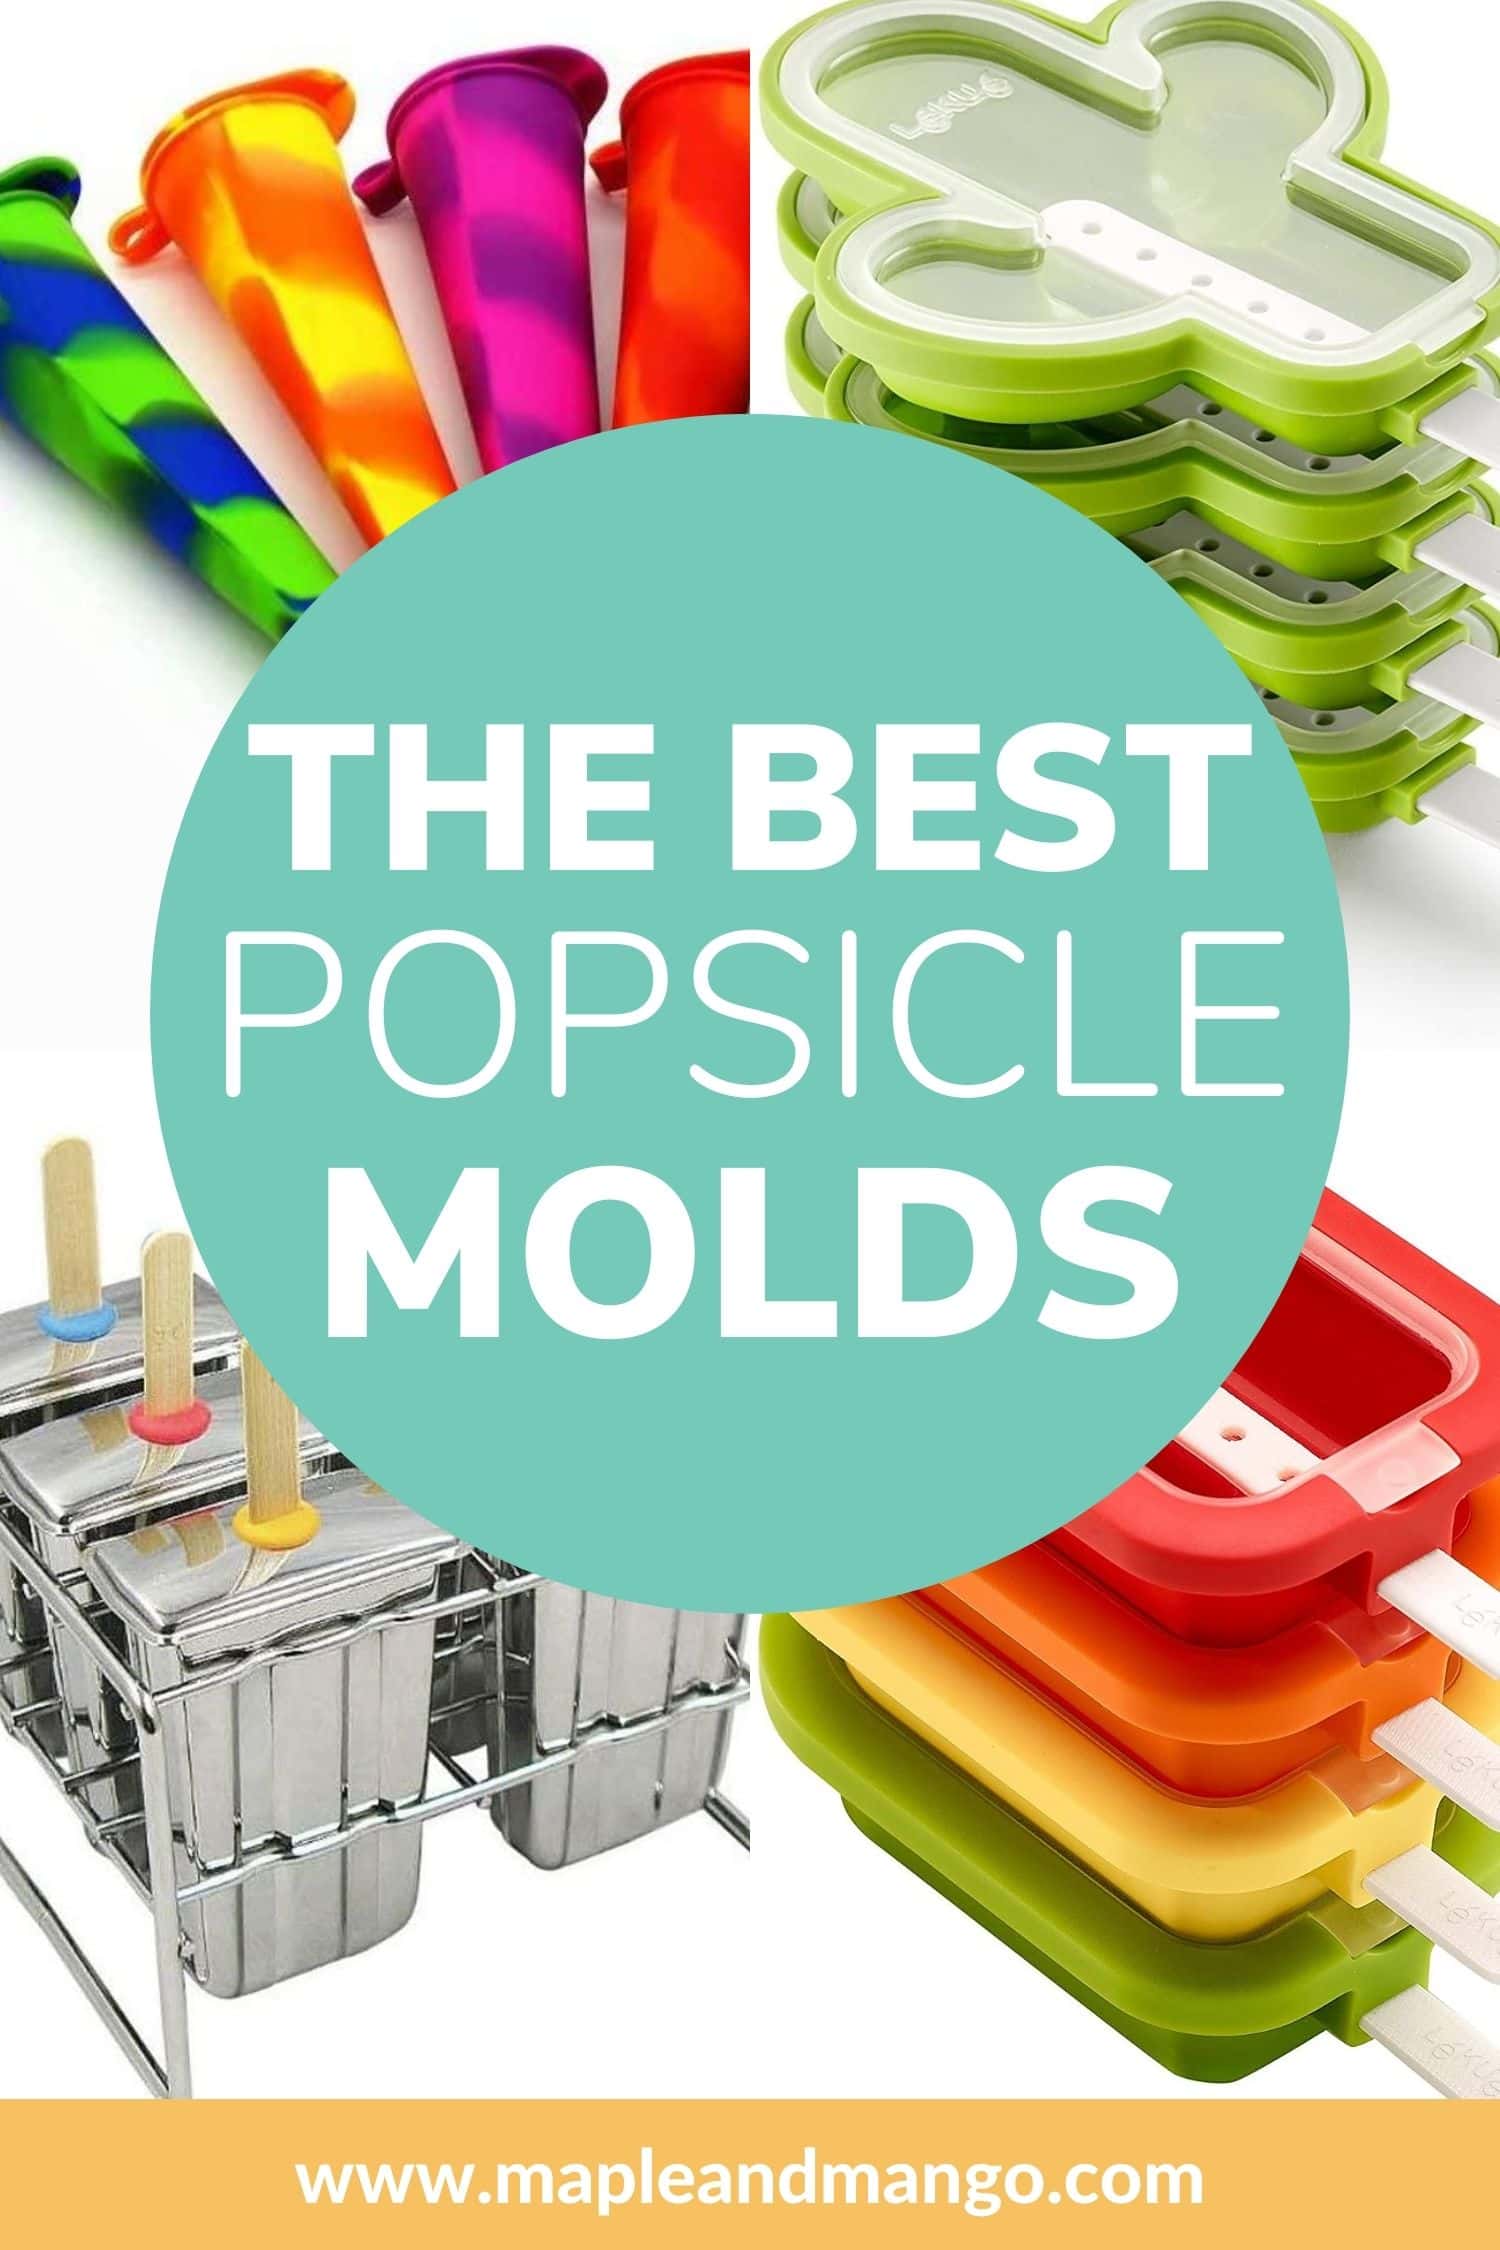 Collage of four popsicle molds with text overlay "The Best Popsicle Molds"